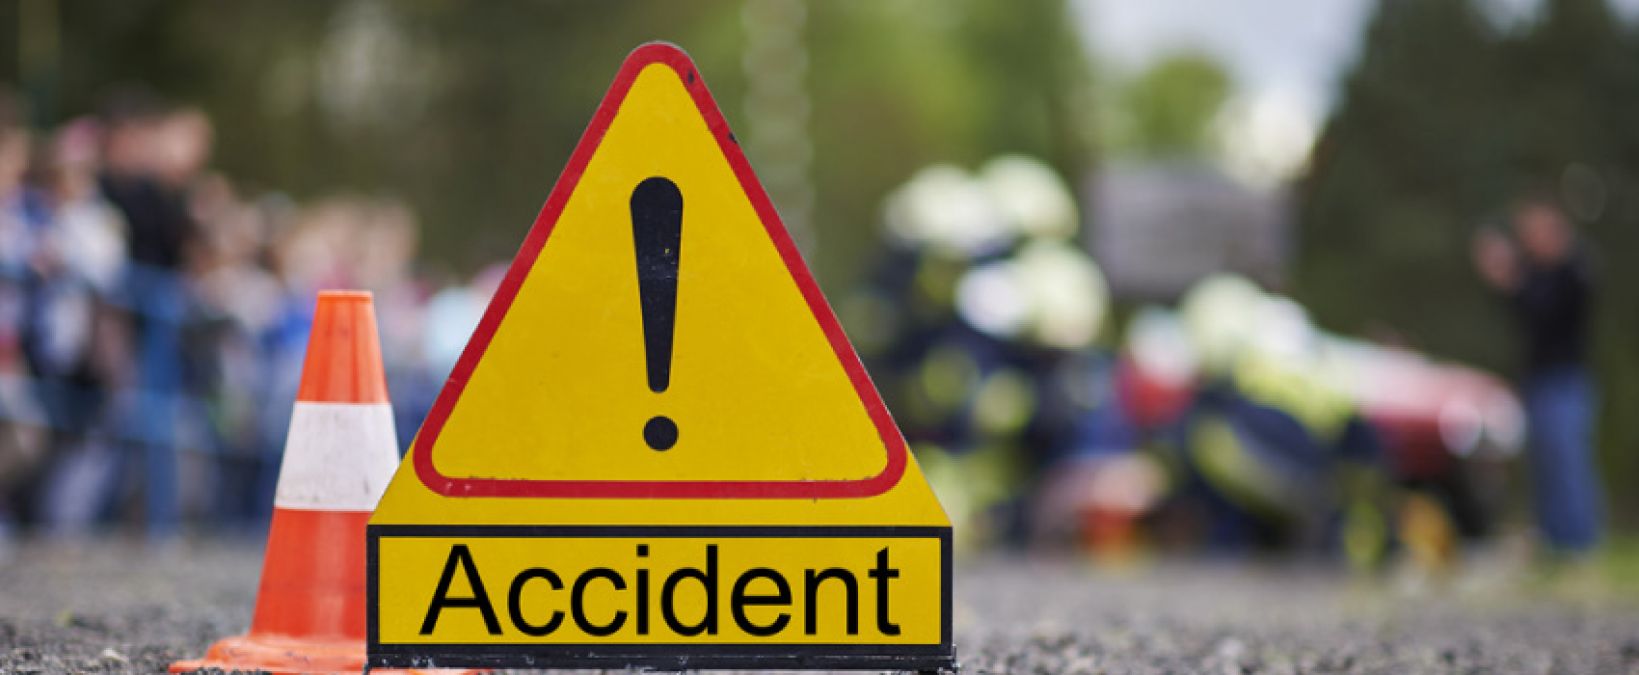 Tragic road accident in Korba, one dead and five injured